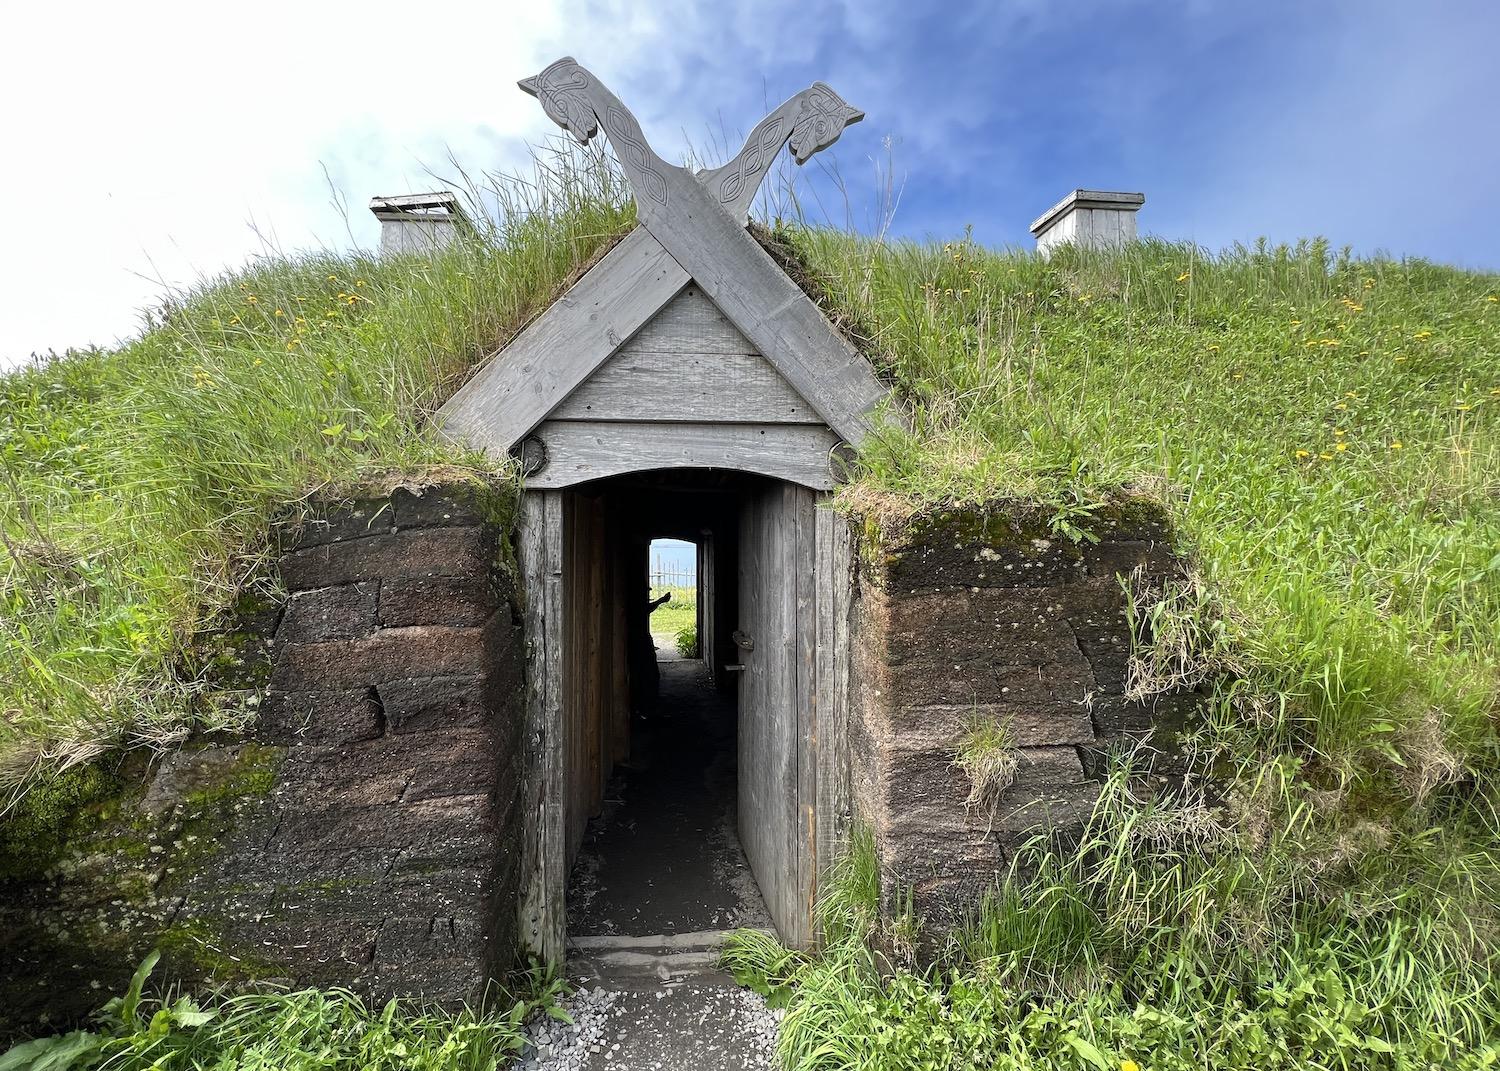 A reconstructed sod building at the Viking encampment at L'Anse aux Meadows National Historic Site.